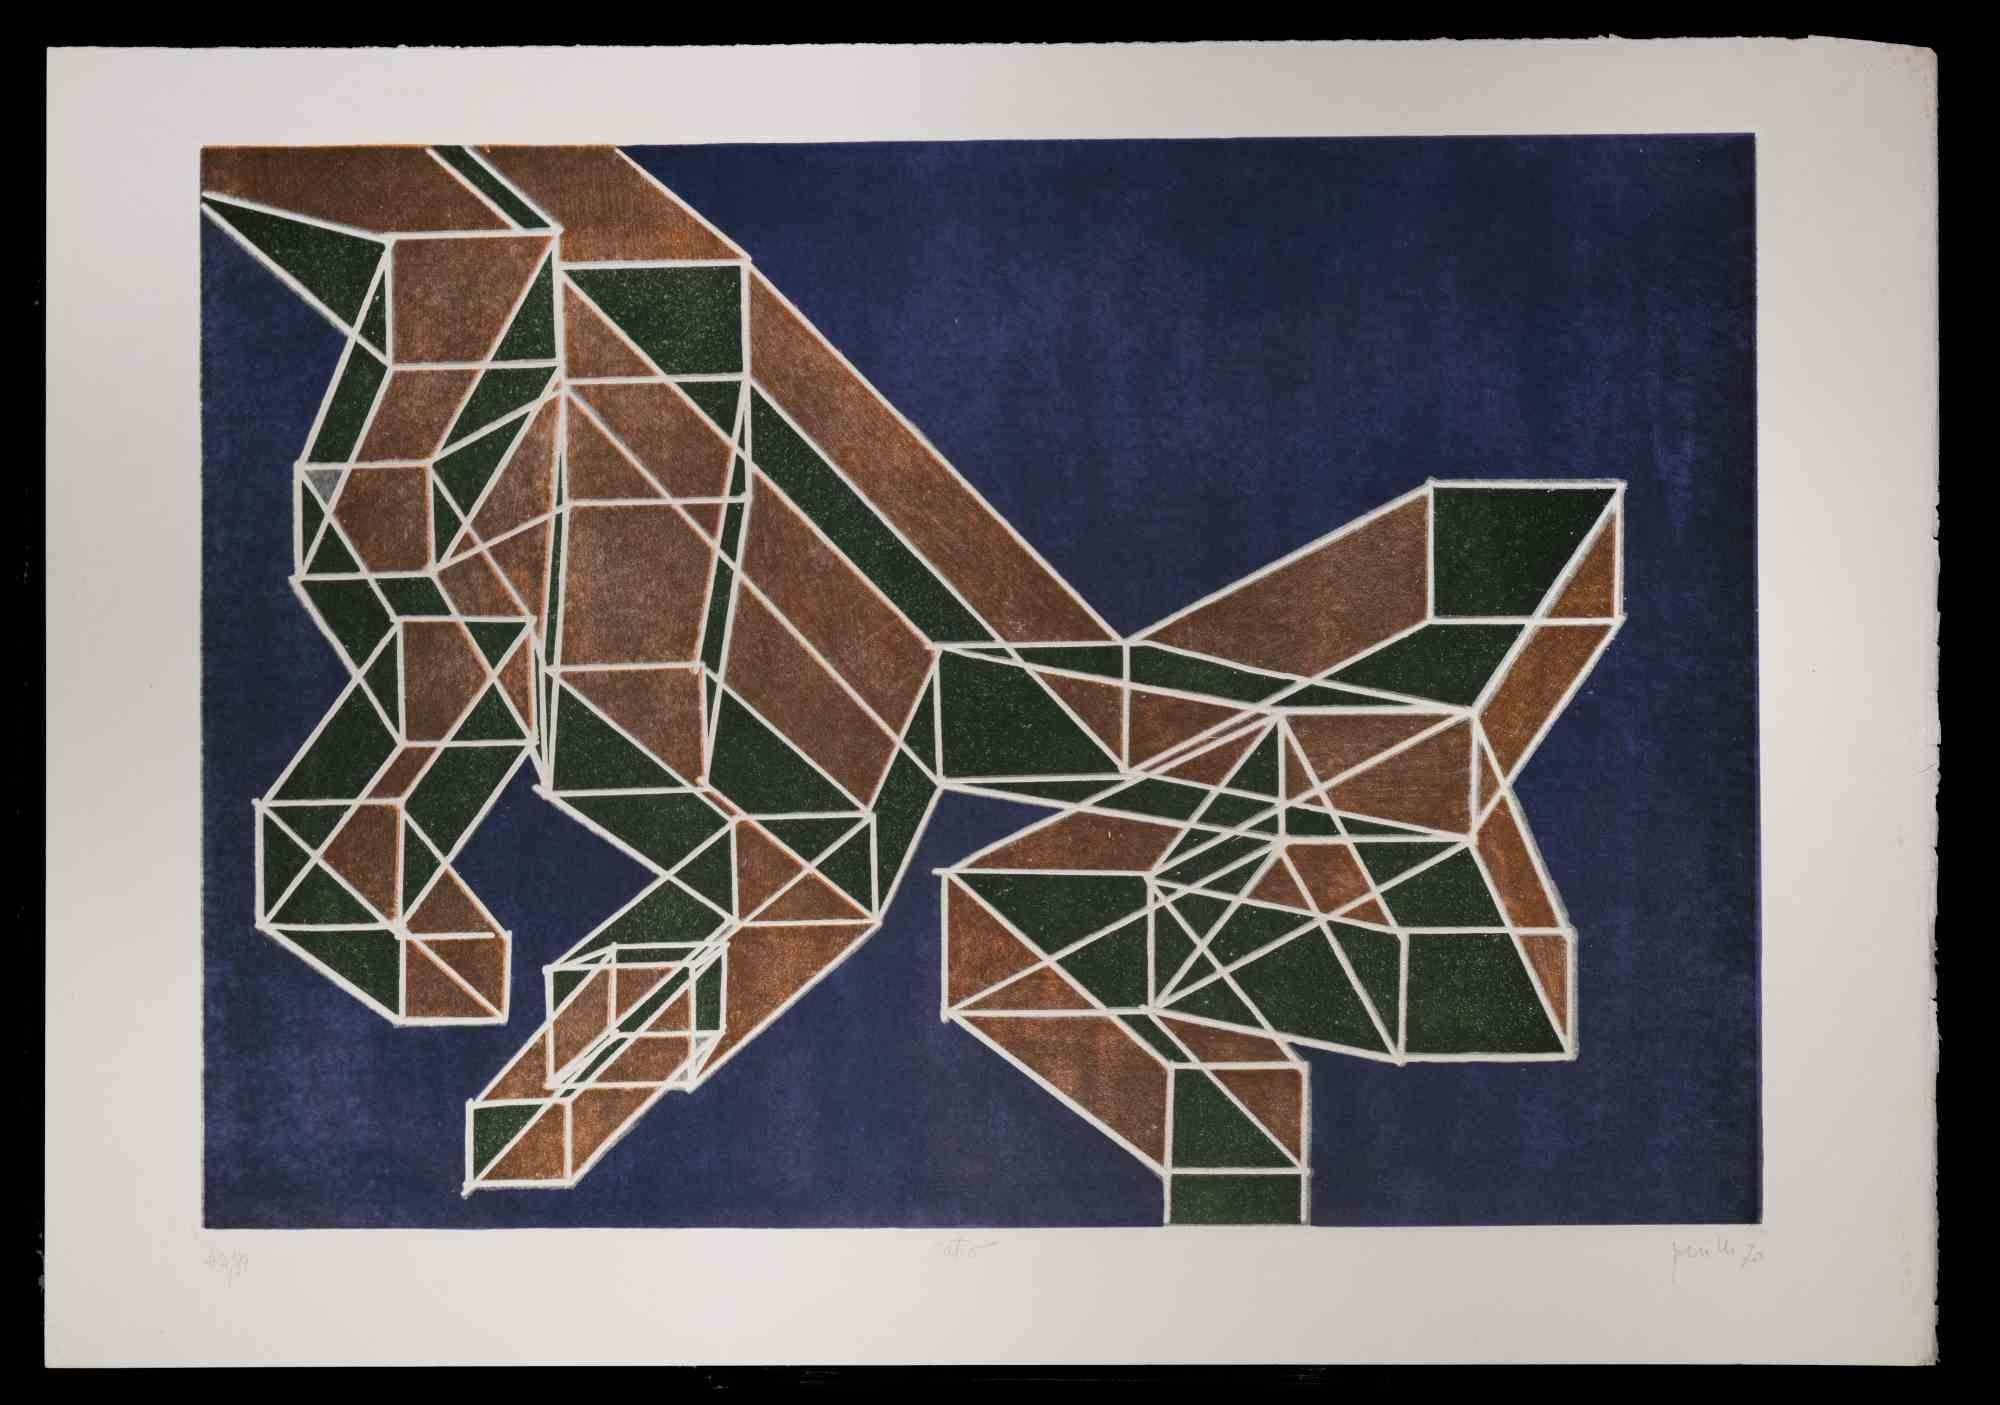 Ratio is an original color lithograph realized by the italian artist Achille Perilli in 1970

Hand Signed and dated on the lower right margin

Numbered on the lower left margin. Edition of 99 pieces.